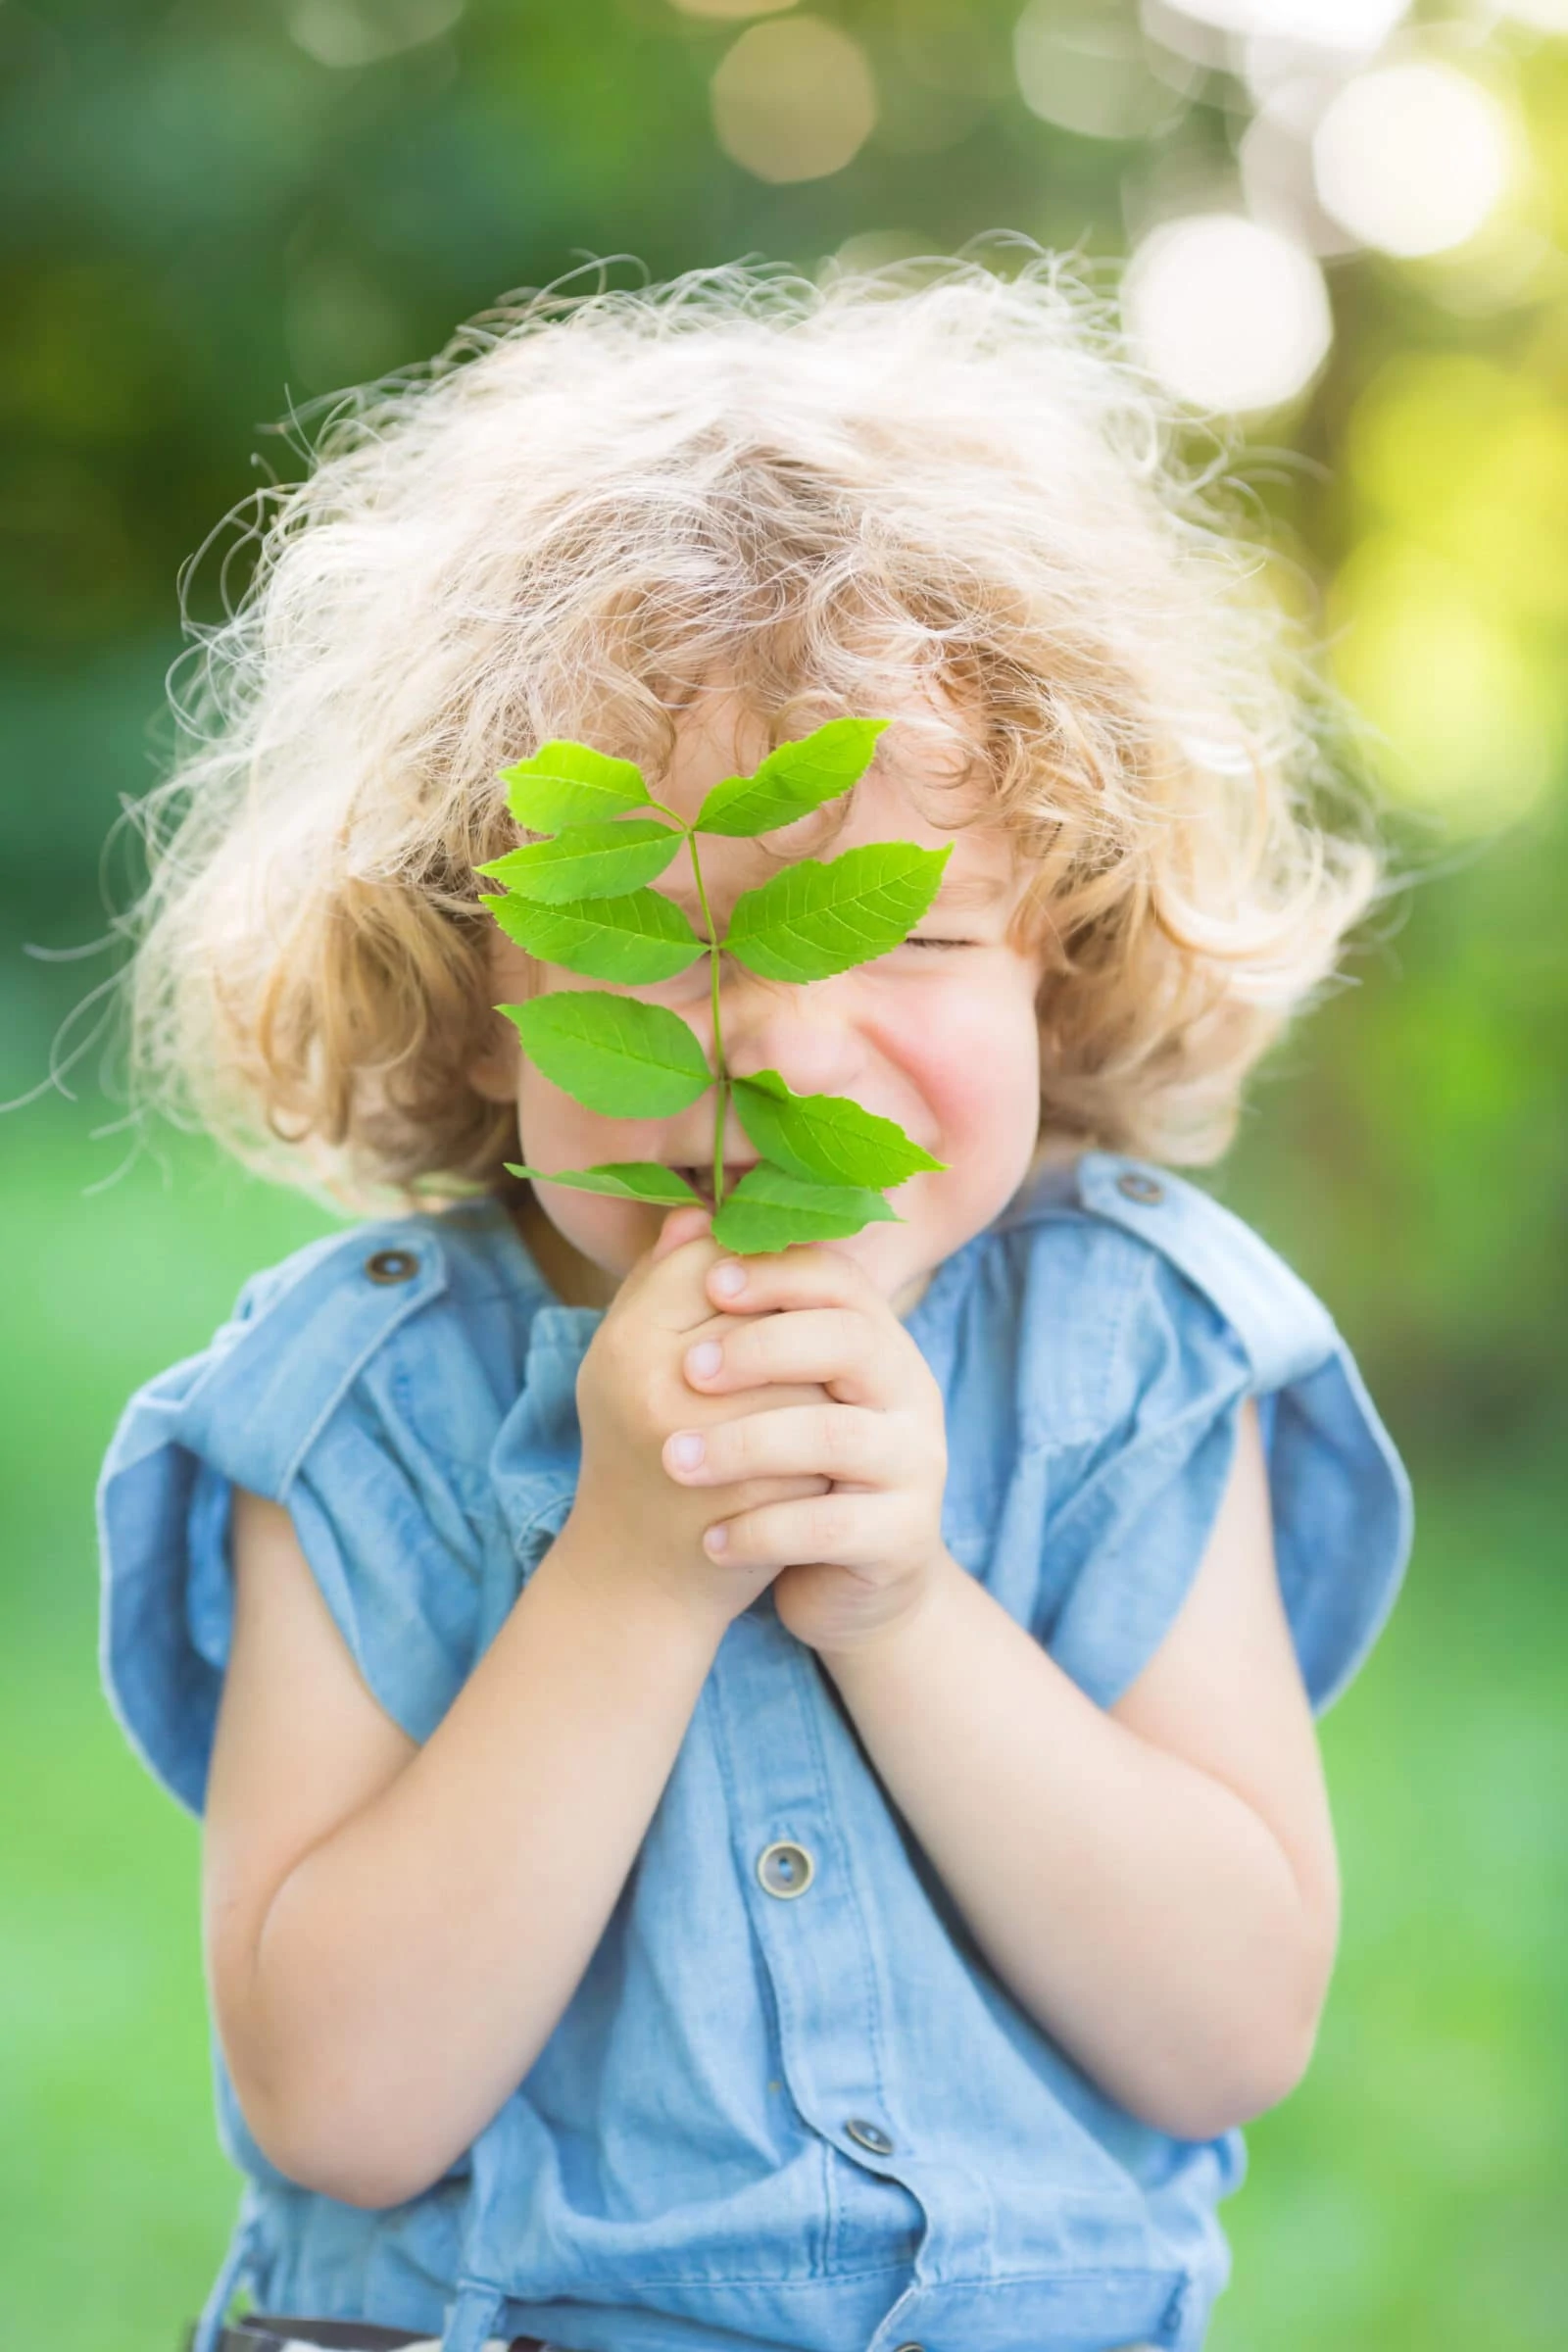 Child holds green plant in front of face